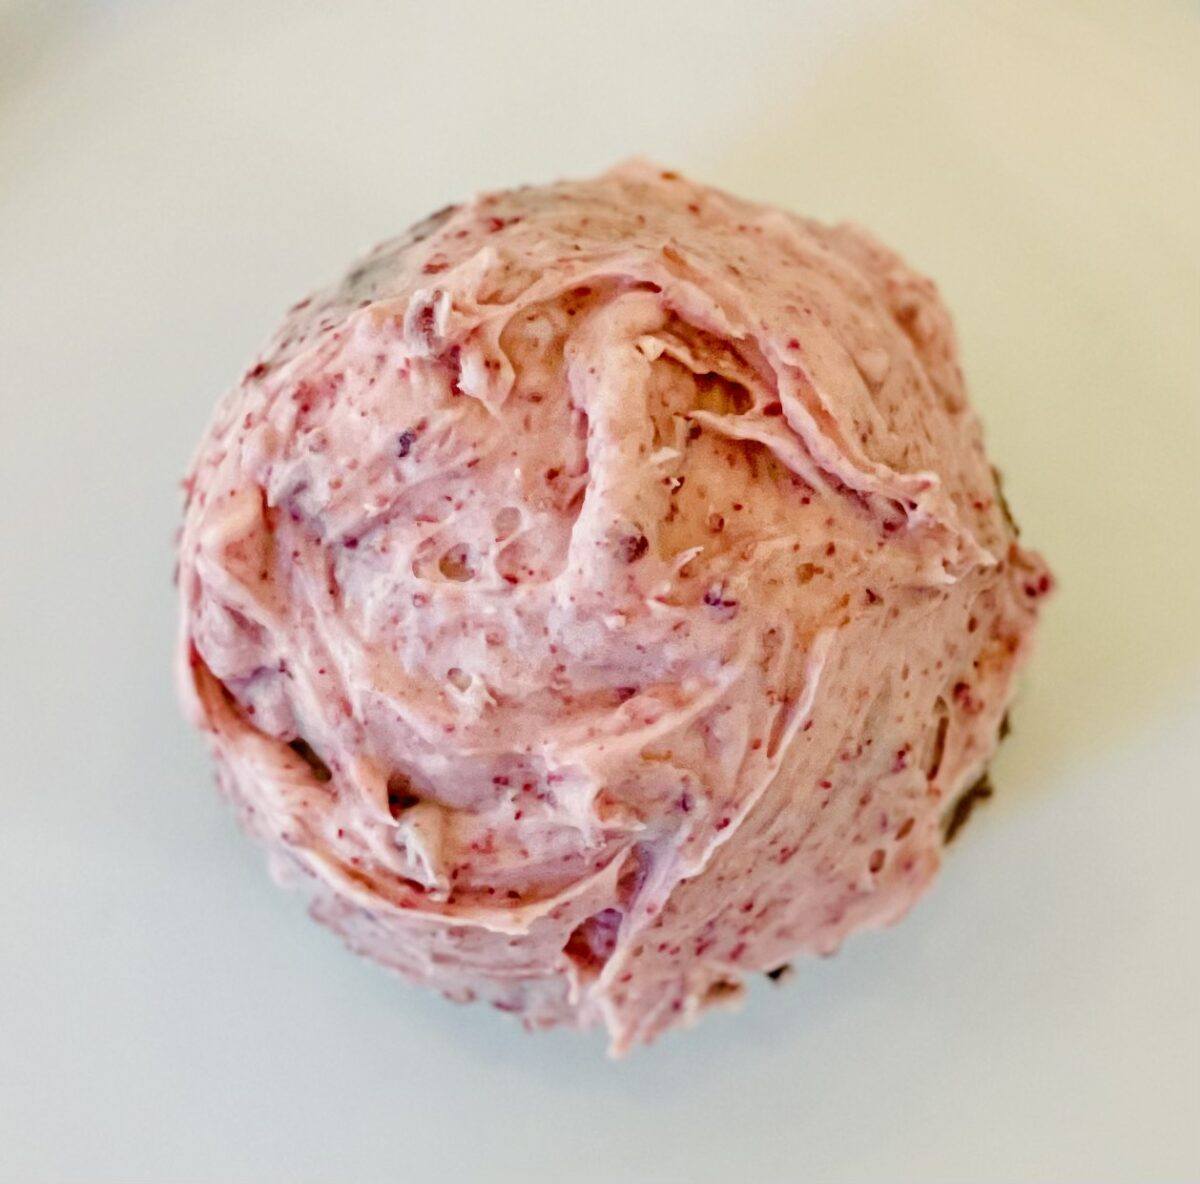 Cherry frosting with freeze-dried cherries